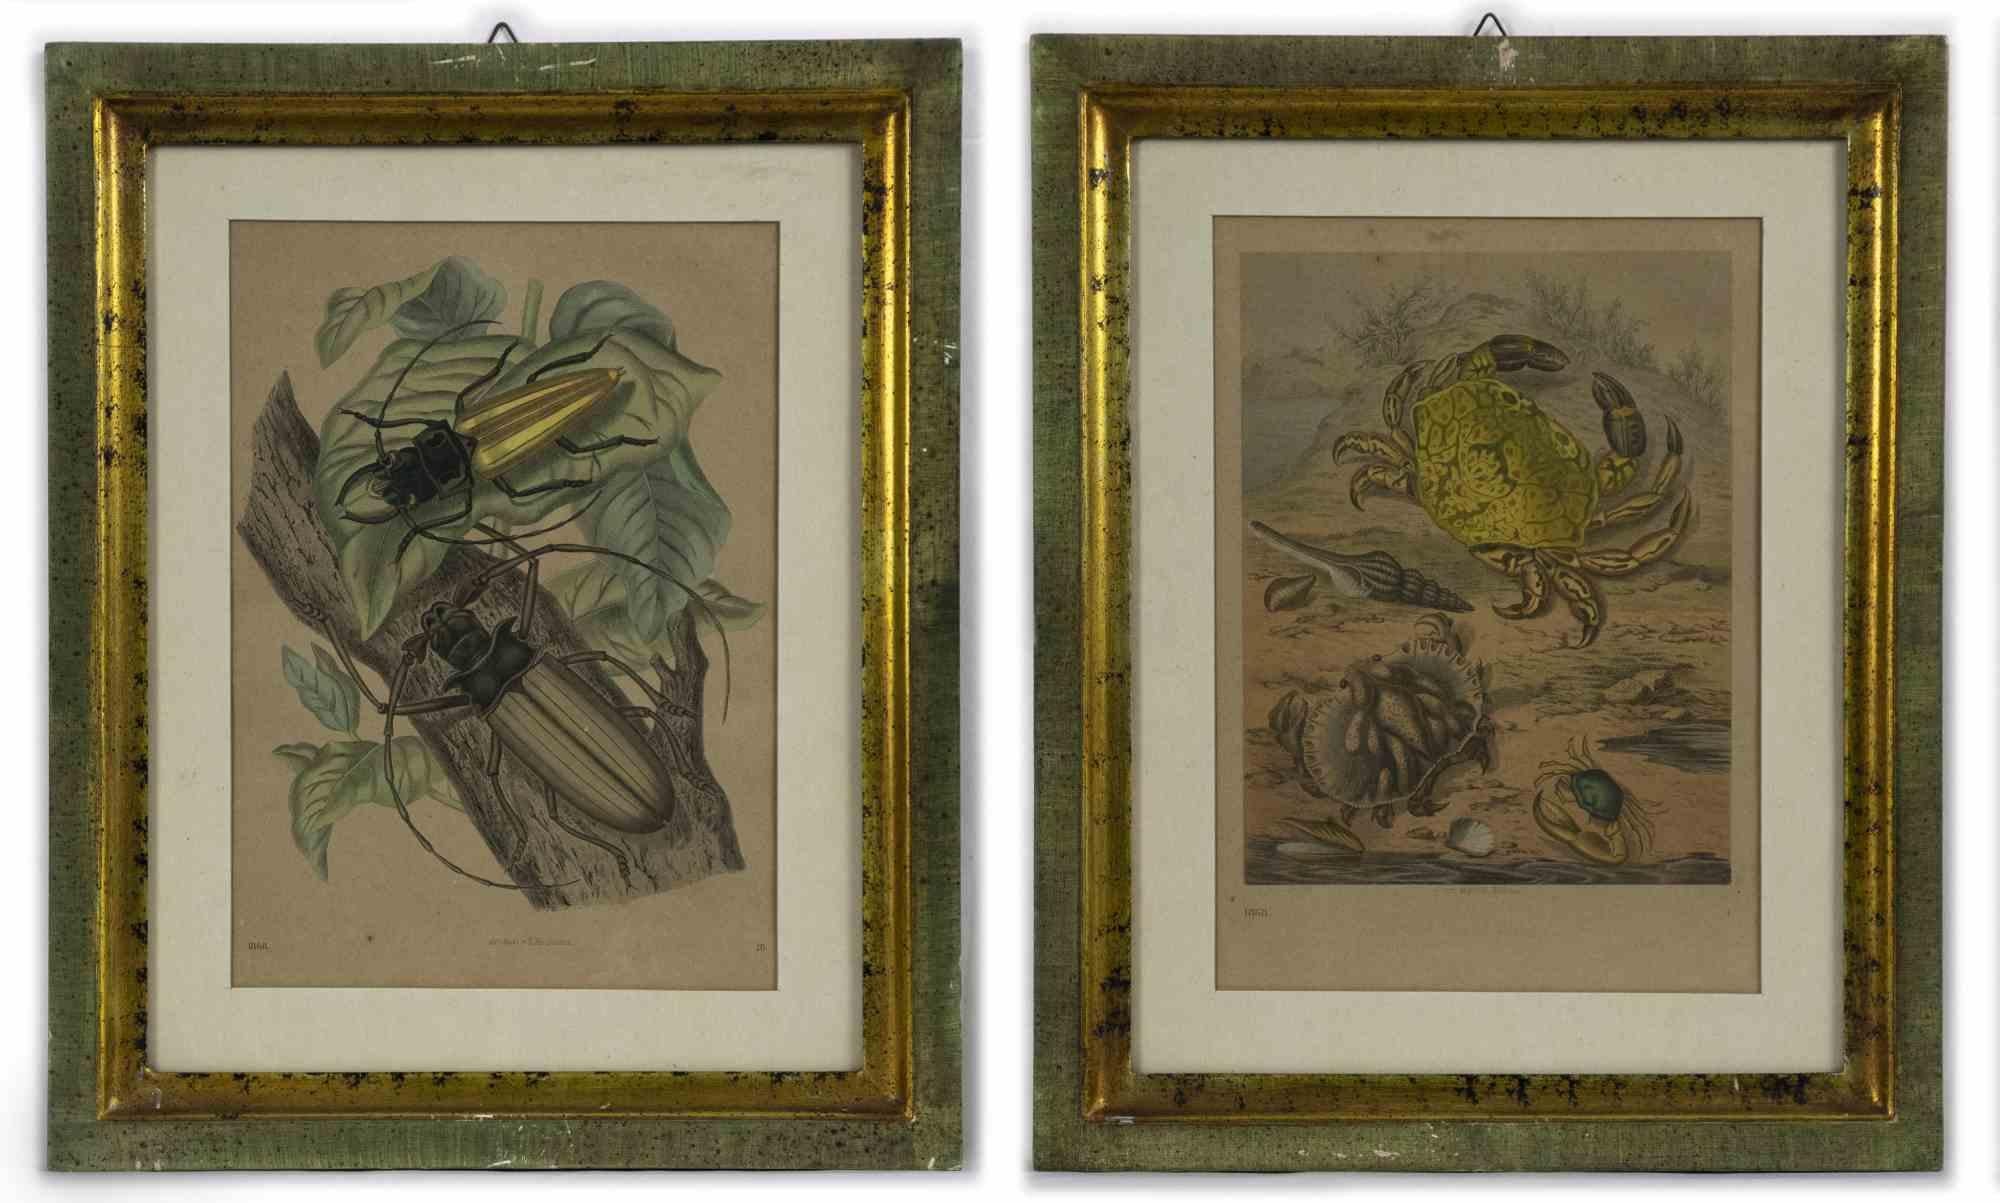 Insect is an original pair of modern artwork realized in 1868 by the German atist E. Hochdanz 

Hand watercolored lithograph.

Printed on plate of both artworks: Art Anst.v E.Hochdanz. Dated on lower left and number of plate print on lower